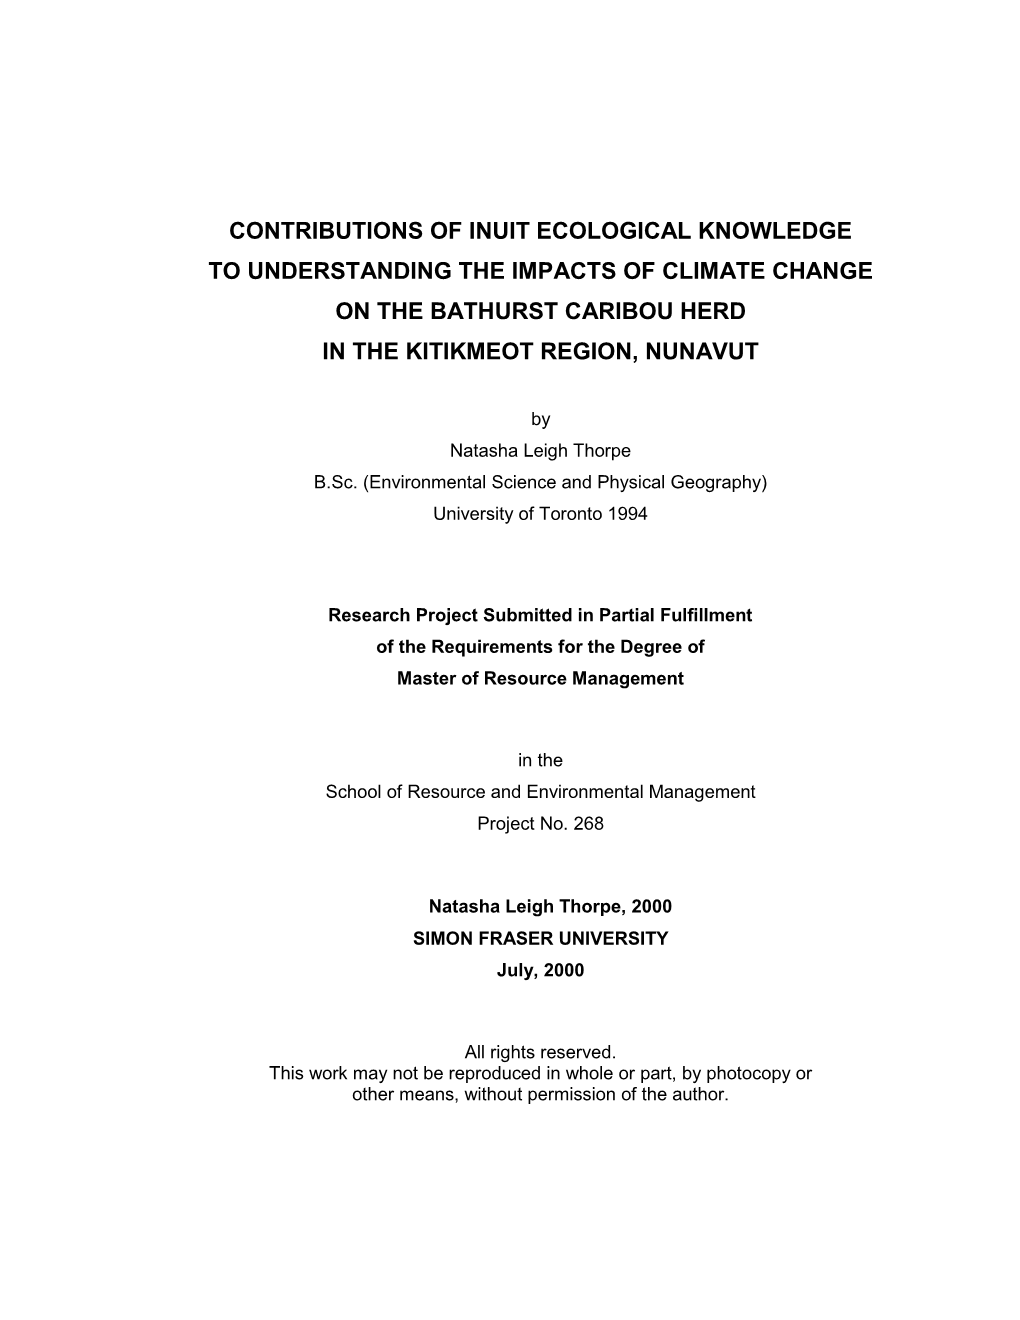 Contributions of Inuit Ecological Knowledge to Understanding the Impacts of Climate Change on the Bathurst Caribou Herd in the Kitikmeot Region, Nunavut